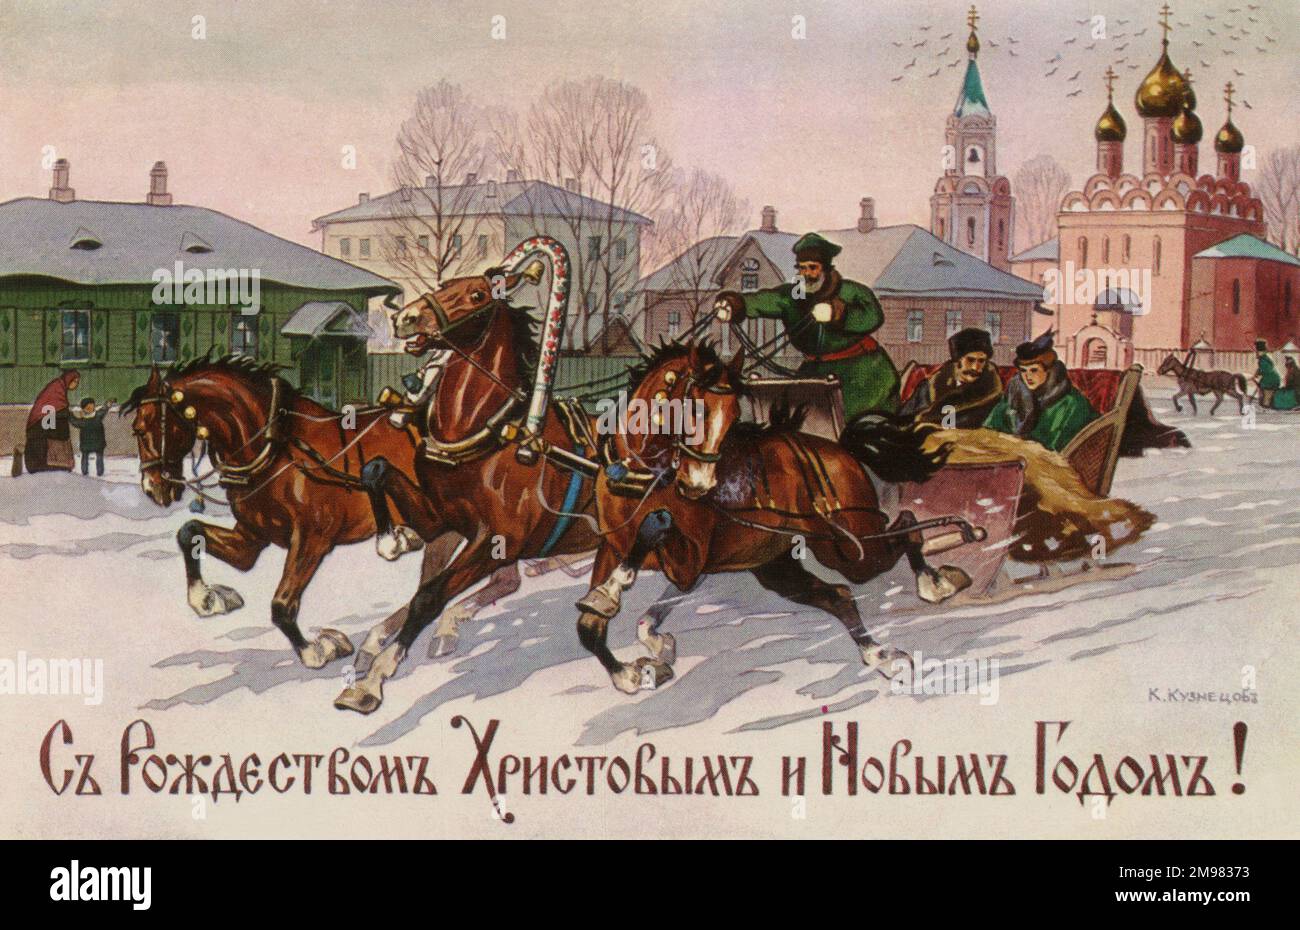 A troika - a traditional Russian harness driving combination, using three horses abreast, usually pulling a sleigh (as on this card). Stock Photo